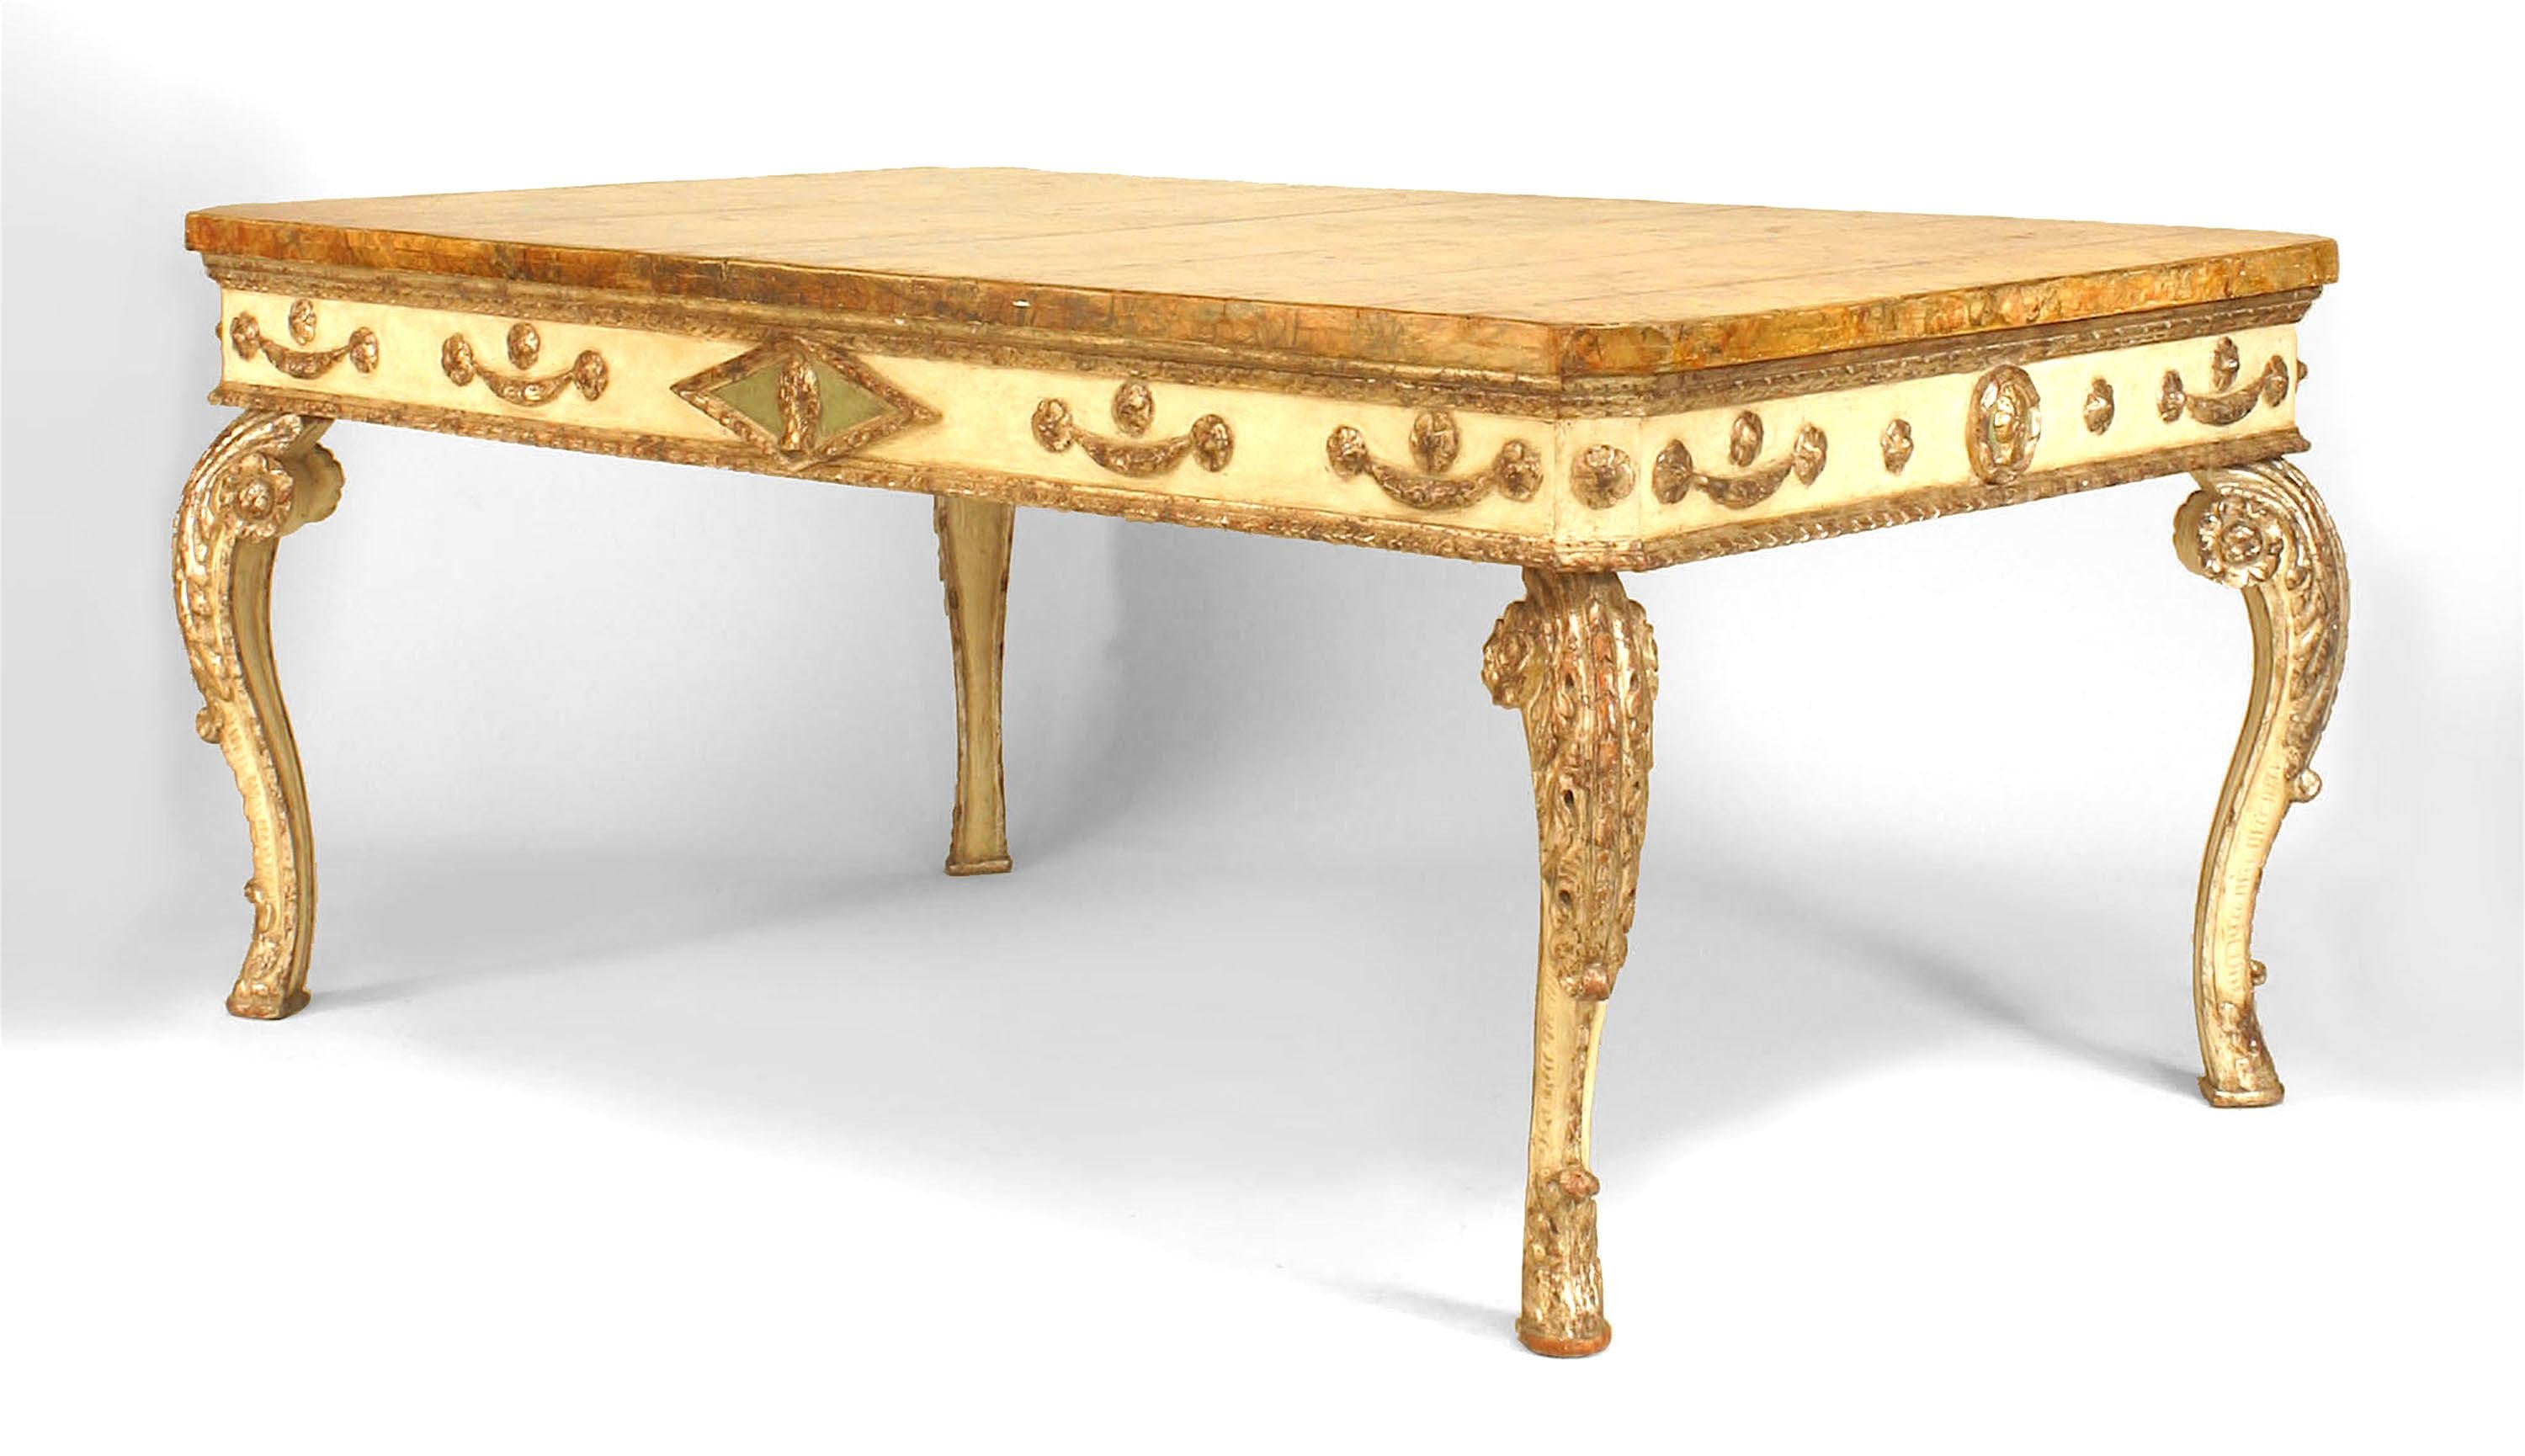 Italian Rococo Style 18th Century Faux Marble Center Table For Sale 1